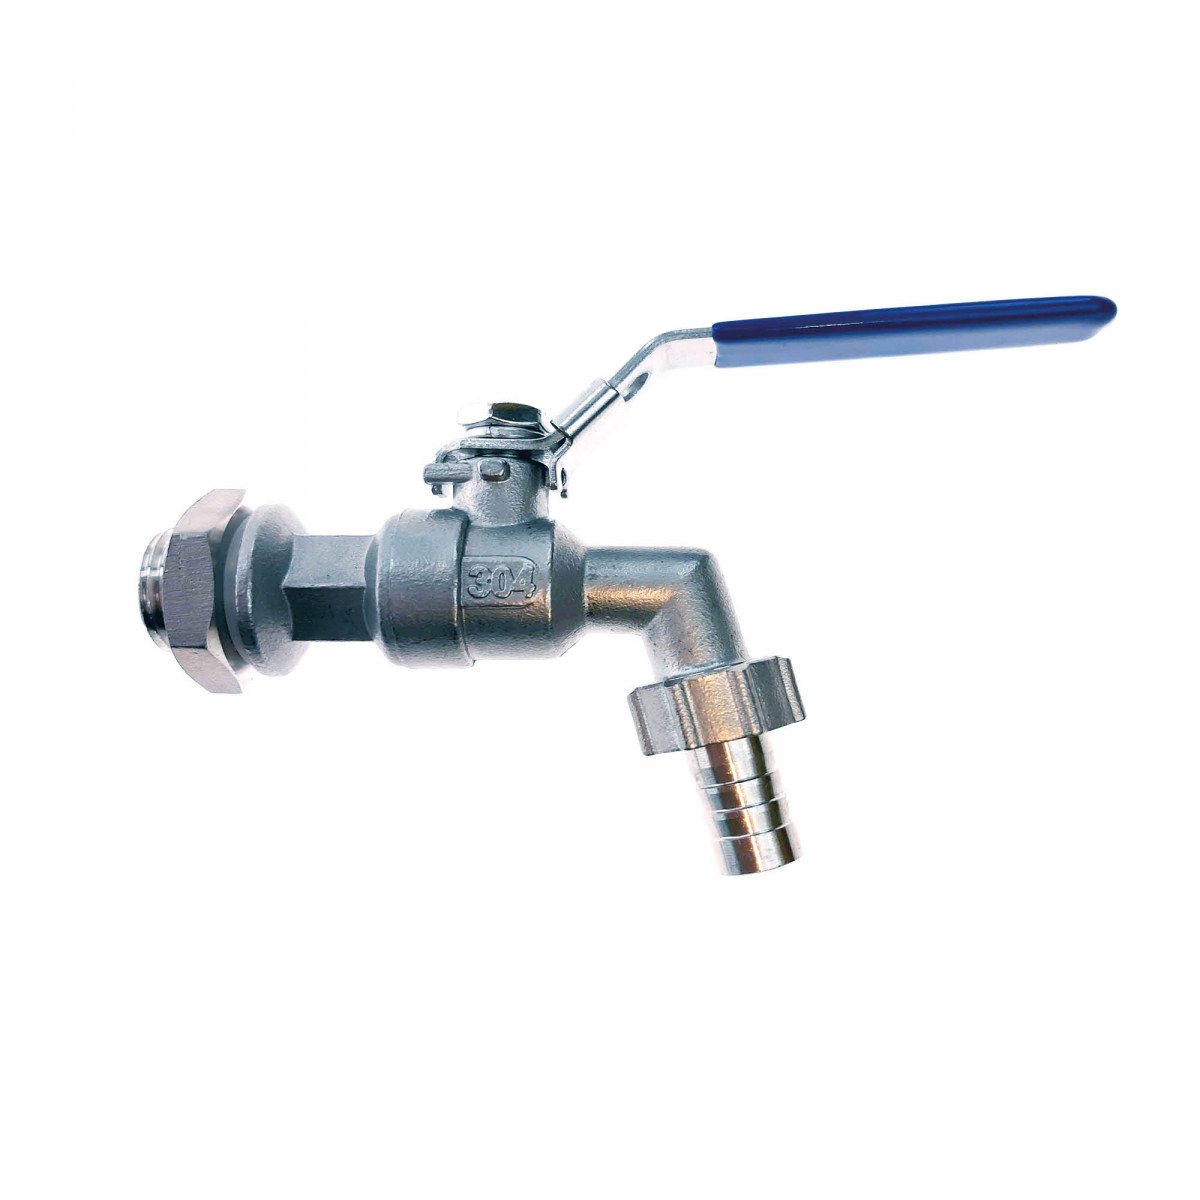 Ball valve 1/2" with counter nut and 13 mm nozzle